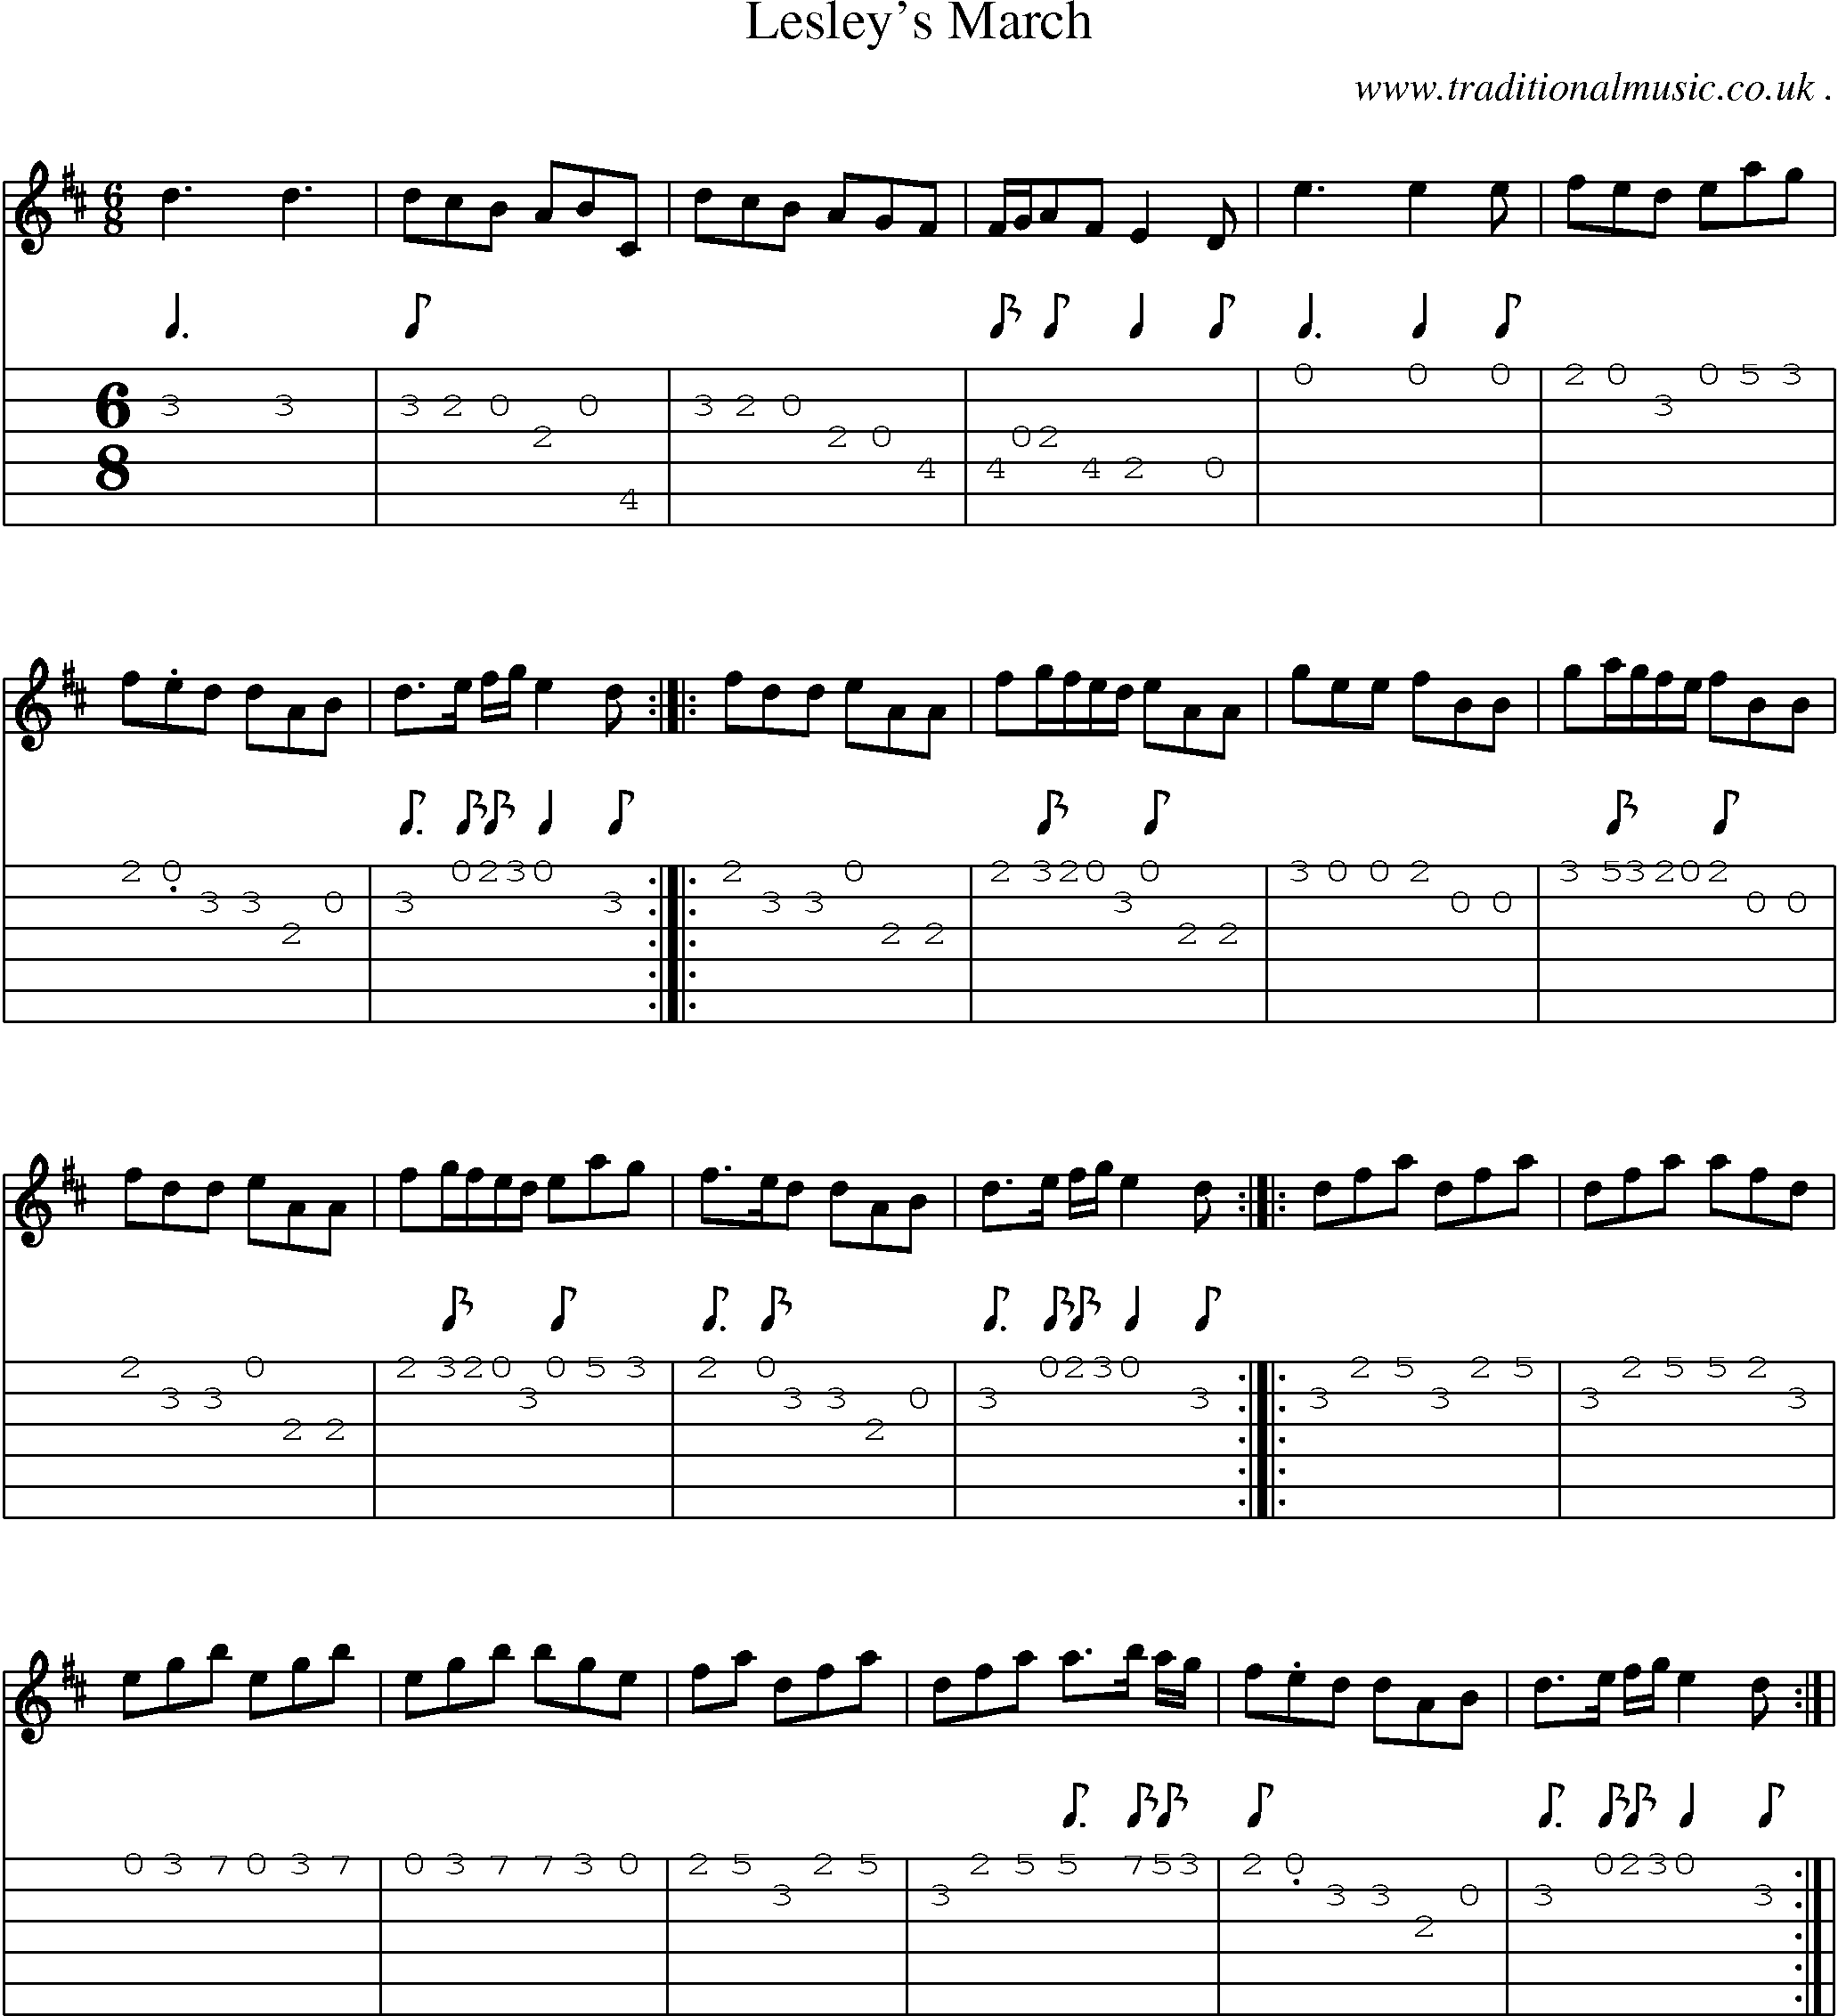 Sheet-Music and Guitar Tabs for Lesleys March